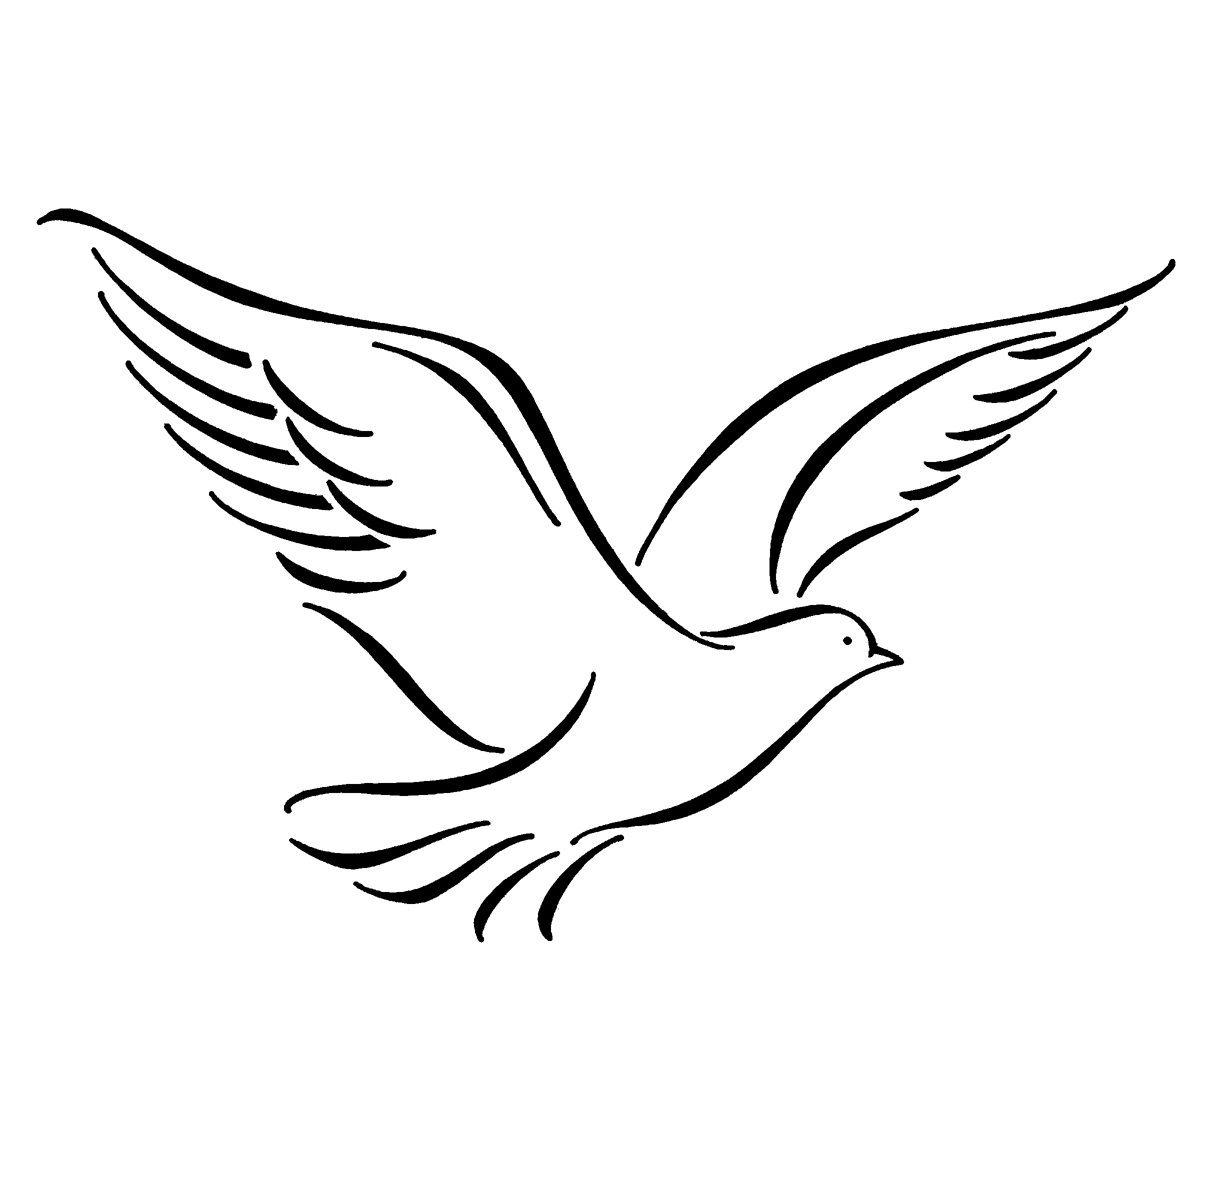 Pin Drawings Doves Flying | Clipart Panda - Free Clipart Images